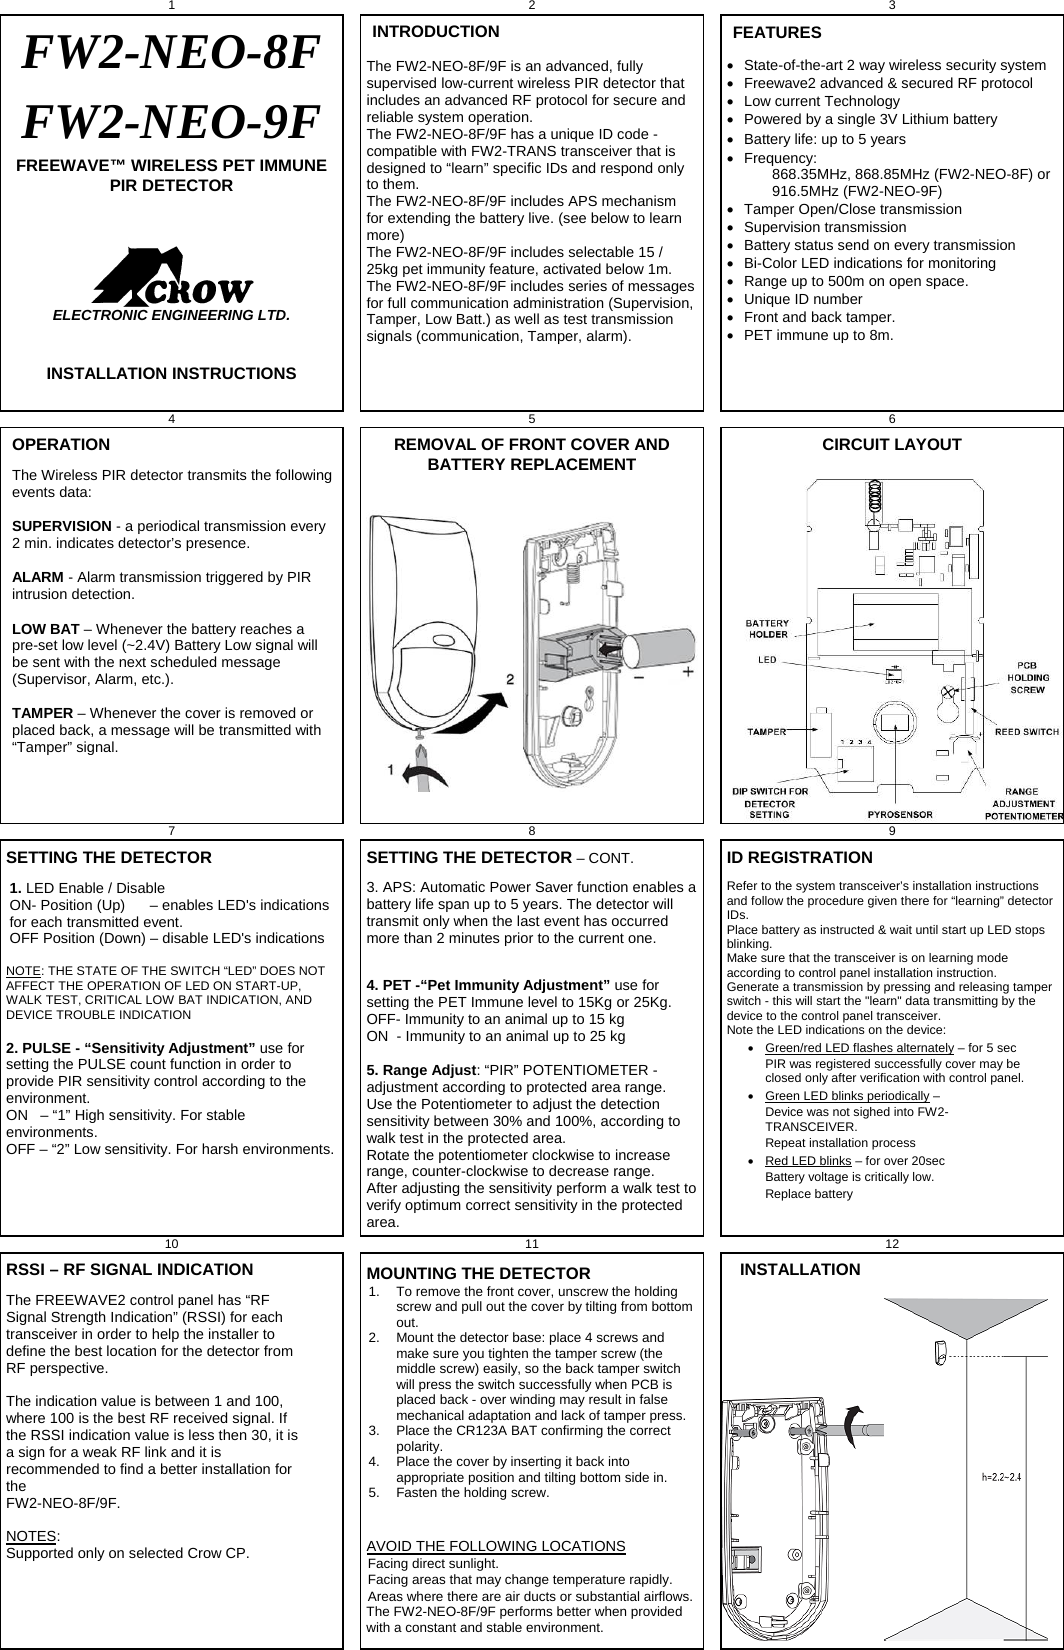 1 2 3 FW2-NEO-8F FW2-NEO-9F FREEWAVE™ WIRELESS PET IMMUNE PIR DETECTOR    ELECTRONIC ENGINEERING LTD.   INSTALLATION INSTRUCTIONS  INTRODUCTION The FW2-NEO-8F/9F is an advanced, fully supervised low-current wireless PIR detector that includes an advanced RF protocol for secure and reliable system operation. The FW2-NEO-8F/9F has a unique ID code - compatible with FW2-TRANS transceiver that is designed to “learn” specific IDs and respond only to them. The FW2-NEO-8F/9F includes APS mechanism for extending the battery live. (see below to learn more) The FW2-NEO-8F/9F includes selectable 15 / 25kg pet immunity feature, activated below 1m. The FW2-NEO-8F/9F includes series of messages for full communication administration (Supervision, Tamper, Low Batt.) as well as test transmission signals (communication, Tamper, alarm).  FEATURES   State-of-the-art 2 way wireless security system   Freewave2 advanced &amp; secured RF protocol   Low current Technology   Powered by a single 3V Lithium battery   Battery life: up to 5 years  Frequency:             868.35MHz, 868.85MHz (FW2-NEO-8F) or             916.5MHz (FW2-NEO-9F)   Tamper Open/Close transmission  Supervision transmission   Battery status send on every transmission   Bi-Color LED indications for monitoring    Range up to 500m on open space.   Unique ID number   Front and back tamper.   PET immune up to 8m.  4 5   6 OPERATION The Wireless PIR detector transmits the following events data:  SUPERVISION - a periodical transmission every 2 min. indicates detector’s presence.  ALARM - Alarm transmission triggered by PIR intrusion detection.  LOW BAT – Whenever the battery reaches a pre-set low level (~2.4V) Battery Low signal will be sent with the next scheduled message (Supervisor, Alarm, etc.).  TAMPER – Whenever the cover is removed or placed back, a message will be transmitted with “Tamper” signal.  REMOVAL OF FRONT COVER AND BATTERY REPLACEMENT   CIRCUIT LAYOUT 7 8   9 SETTING THE DETECTOR 1. LED Enable / Disable   ON- Position (Up)      – enables LED&apos;s indications for each transmitted event. OFF Position (Down) – disable LED&apos;s indications  NOTE: THE STATE OF THE SWITCH “LED” DOES NOT AFFECT THE OPERATION OF LED ON START-UP, WALK TEST, CRITICAL LOW BAT INDICATION, AND DEVICE TROUBLE INDICATION  2. PULSE - “Sensitivity Adjustment” use for setting the PULSE count function in order to provide PIR sensitivity control according to the environment.  ON   – “1” High sensitivity. For stable environments. OFF – “2” Low sensitivity. For harsh environments.   SETTING THE DETECTOR – CONT. 3. APS: Automatic Power Saver function enables a battery life span up to 5 years. The detector will transmit only when the last event has occurred more than 2 minutes prior to the current one.   4. PET -“Pet Immunity Adjustment” use for setting the PET Immune level to 15Kg or 25Kg.  OFF- Immunity to an animal up to 15 kg  ON  - Immunity to an animal up to 25 kg  5. Range Adjust: “PIR” POTENTIOMETER - adjustment according to protected area range. Use the Potentiometer to adjust the detection sensitivity between 30% and 100%, according to walk test in the protected area. Rotate the potentiometer clockwise to increase range, counter-clockwise to decrease range. After adjusting the sensitivity perform a walk test to verify optimum correct sensitivity in the protected area. ID REGISTRATION Refer to the system transceiver’s installation instructions and follow the procedure given there for “learning” detector IDs.  Place battery as instructed &amp; wait until start up LED stops blinking. Make sure that the transceiver is on learning mode according to control panel installation instruction. Generate a transmission by pressing and releasing tamper switch - this will start the &quot;learn&quot; data transmitting by the device to the control panel transceiver.  Note the LED indications on the device:    Green/red LED flashes alternately – for 5 sec     PIR was registered successfully cover may be closed only after verification with control panel.   Green LED blinks periodically – Device was not sighed into FW2-TRANSCEIVER.   Repeat installation process   Red LED blinks – for over 20sec Battery voltage is critically low.  Replace battery  10   11 12 RSSI – RF SIGNAL INDICATION The FREEWAVE2 control panel has “RF Signal Strength Indication” (RSSI) for each transceiver in order to help the installer to define the best location for the detector from RF perspective.  The indication value is between 1 and 100, where 100 is the best RF received signal. If the RSSI indication value is less then 30, it is a sign for a weak RF link and it is recommended to find a better installation for the  FW2-NEO-8F/9F.   NOTES:  Supported only on selected Crow CP.   MOUNTING THE DETECTOR 1.  To remove the front cover, unscrew the holding screw and pull out the cover by tilting from bottom out. 2.  Mount the detector base: place 4 screws and make sure you tighten the tamper screw (the middle screw) easily, so the back tamper switch will press the switch successfully when PCB is placed back - over winding may result in false mechanical adaptation and lack of tamper press.  3.  Place the CR123A BAT confirming the correct polarity.  4.  Place the cover by inserting it back into appropriate position and tilting bottom side in.  5.  Fasten the holding screw.  AVOID THE FOLLOWING LOCATIONS Facing direct sunlight. Facing areas that may change temperature rapidly. Areas where there are air ducts or substantial airflows. The FW2-NEO-8F/9F performs better when provided with a constant and stable environment.   INSTALLATION    